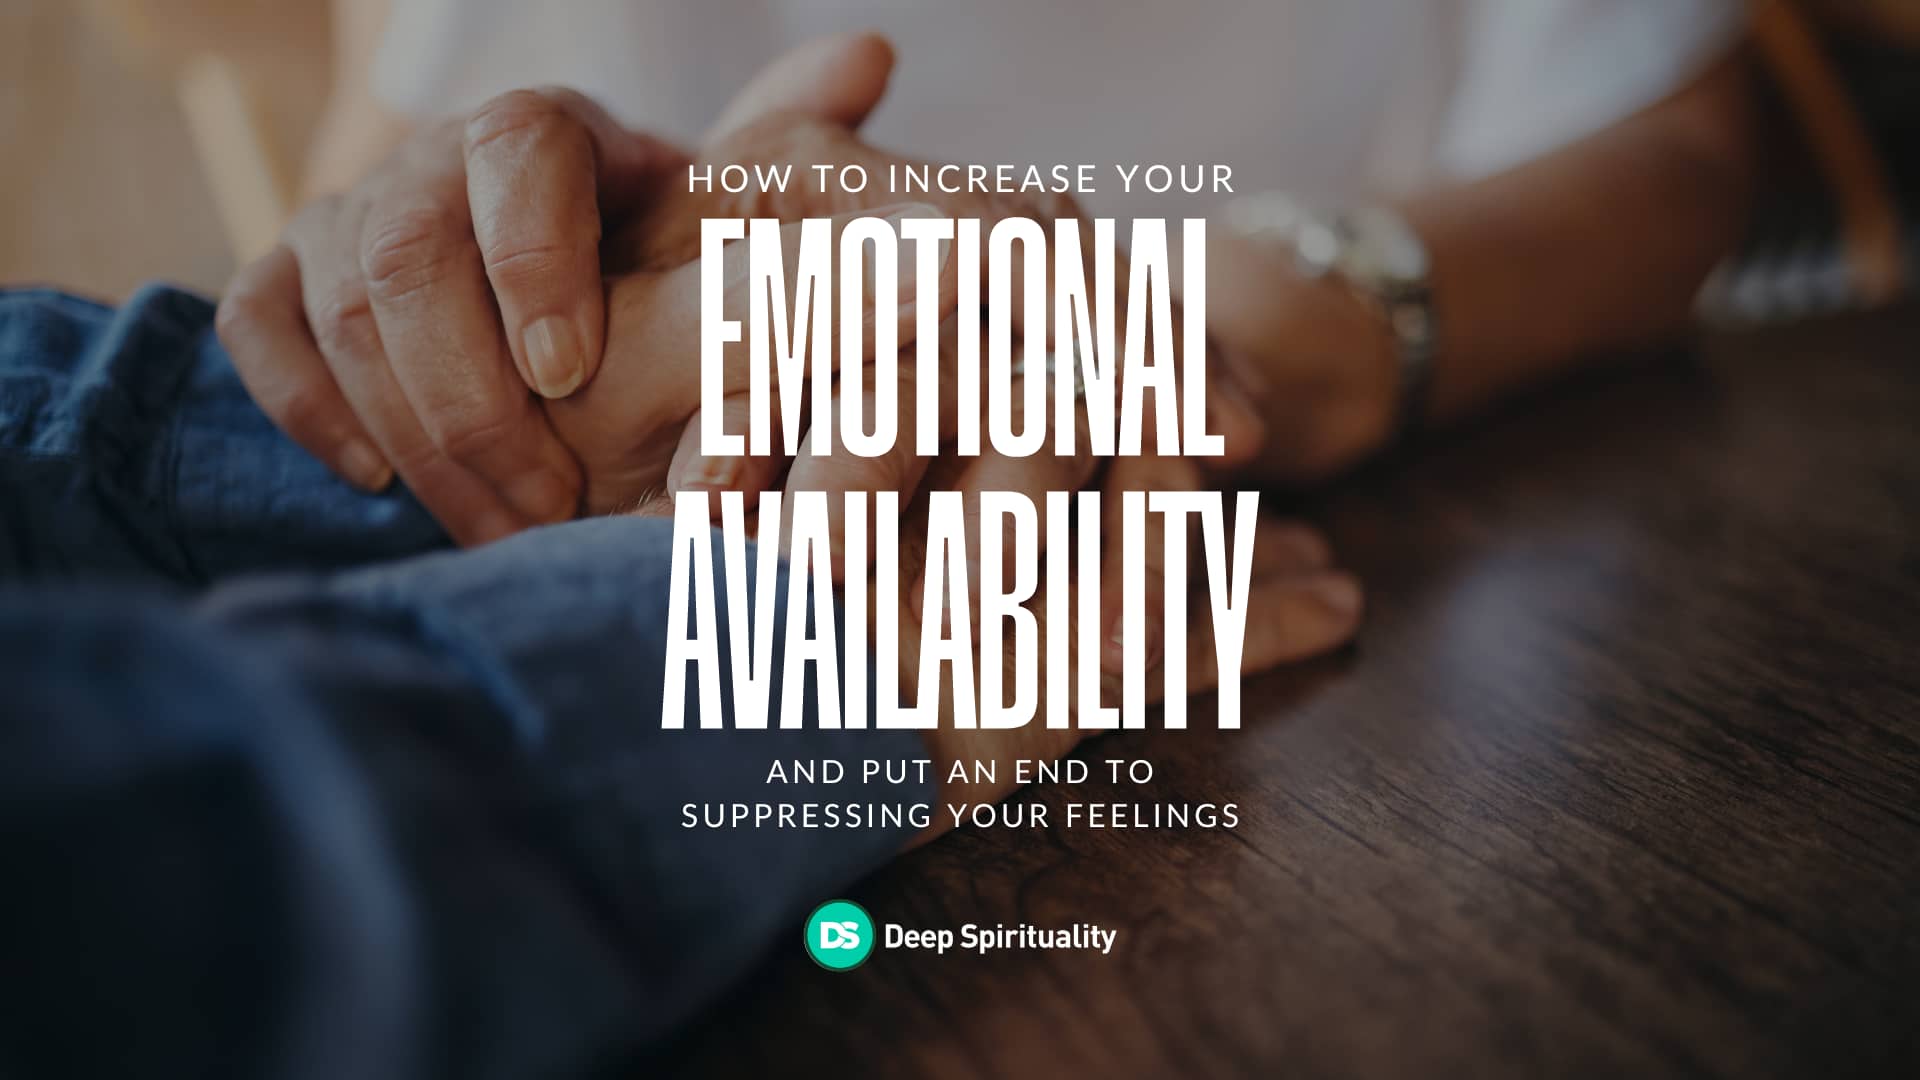 How to Increase Your Emotional Availability and Put an End to Suppressing Your Feelings 7